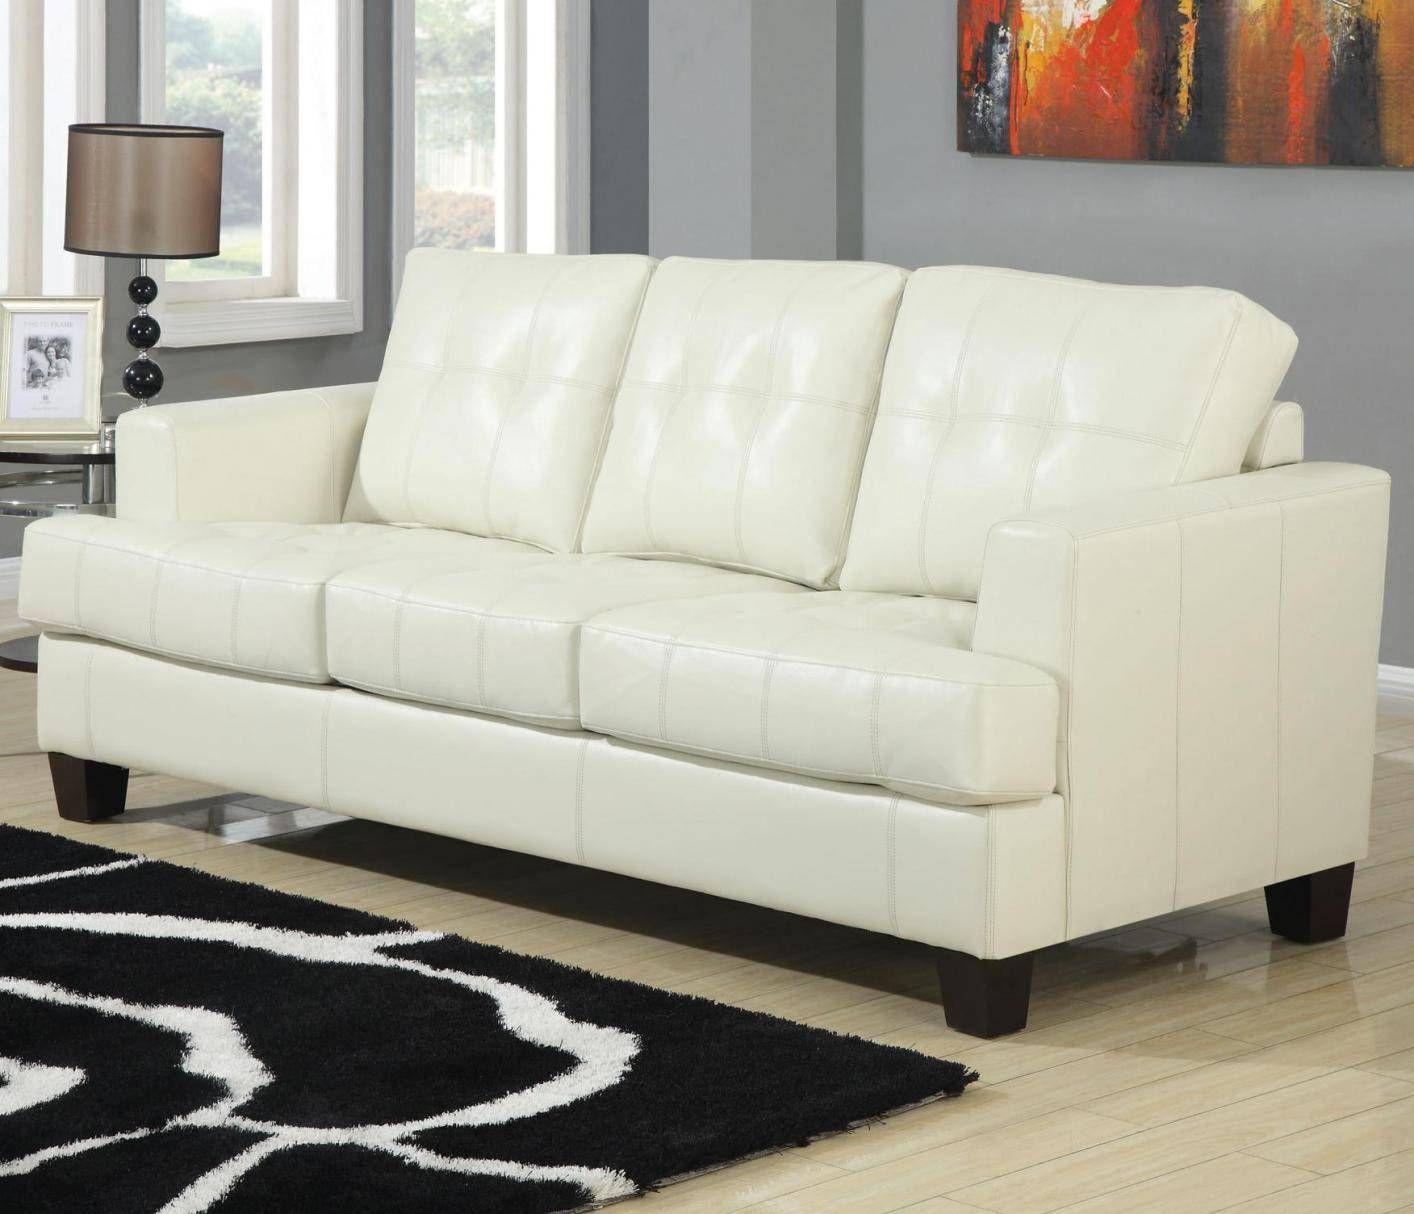 Samuel Beige Leather Sofa Bed – Steal A Sofa Furniture Outlet Los Pertaining To Beige Leather Couches (View 1 of 15)